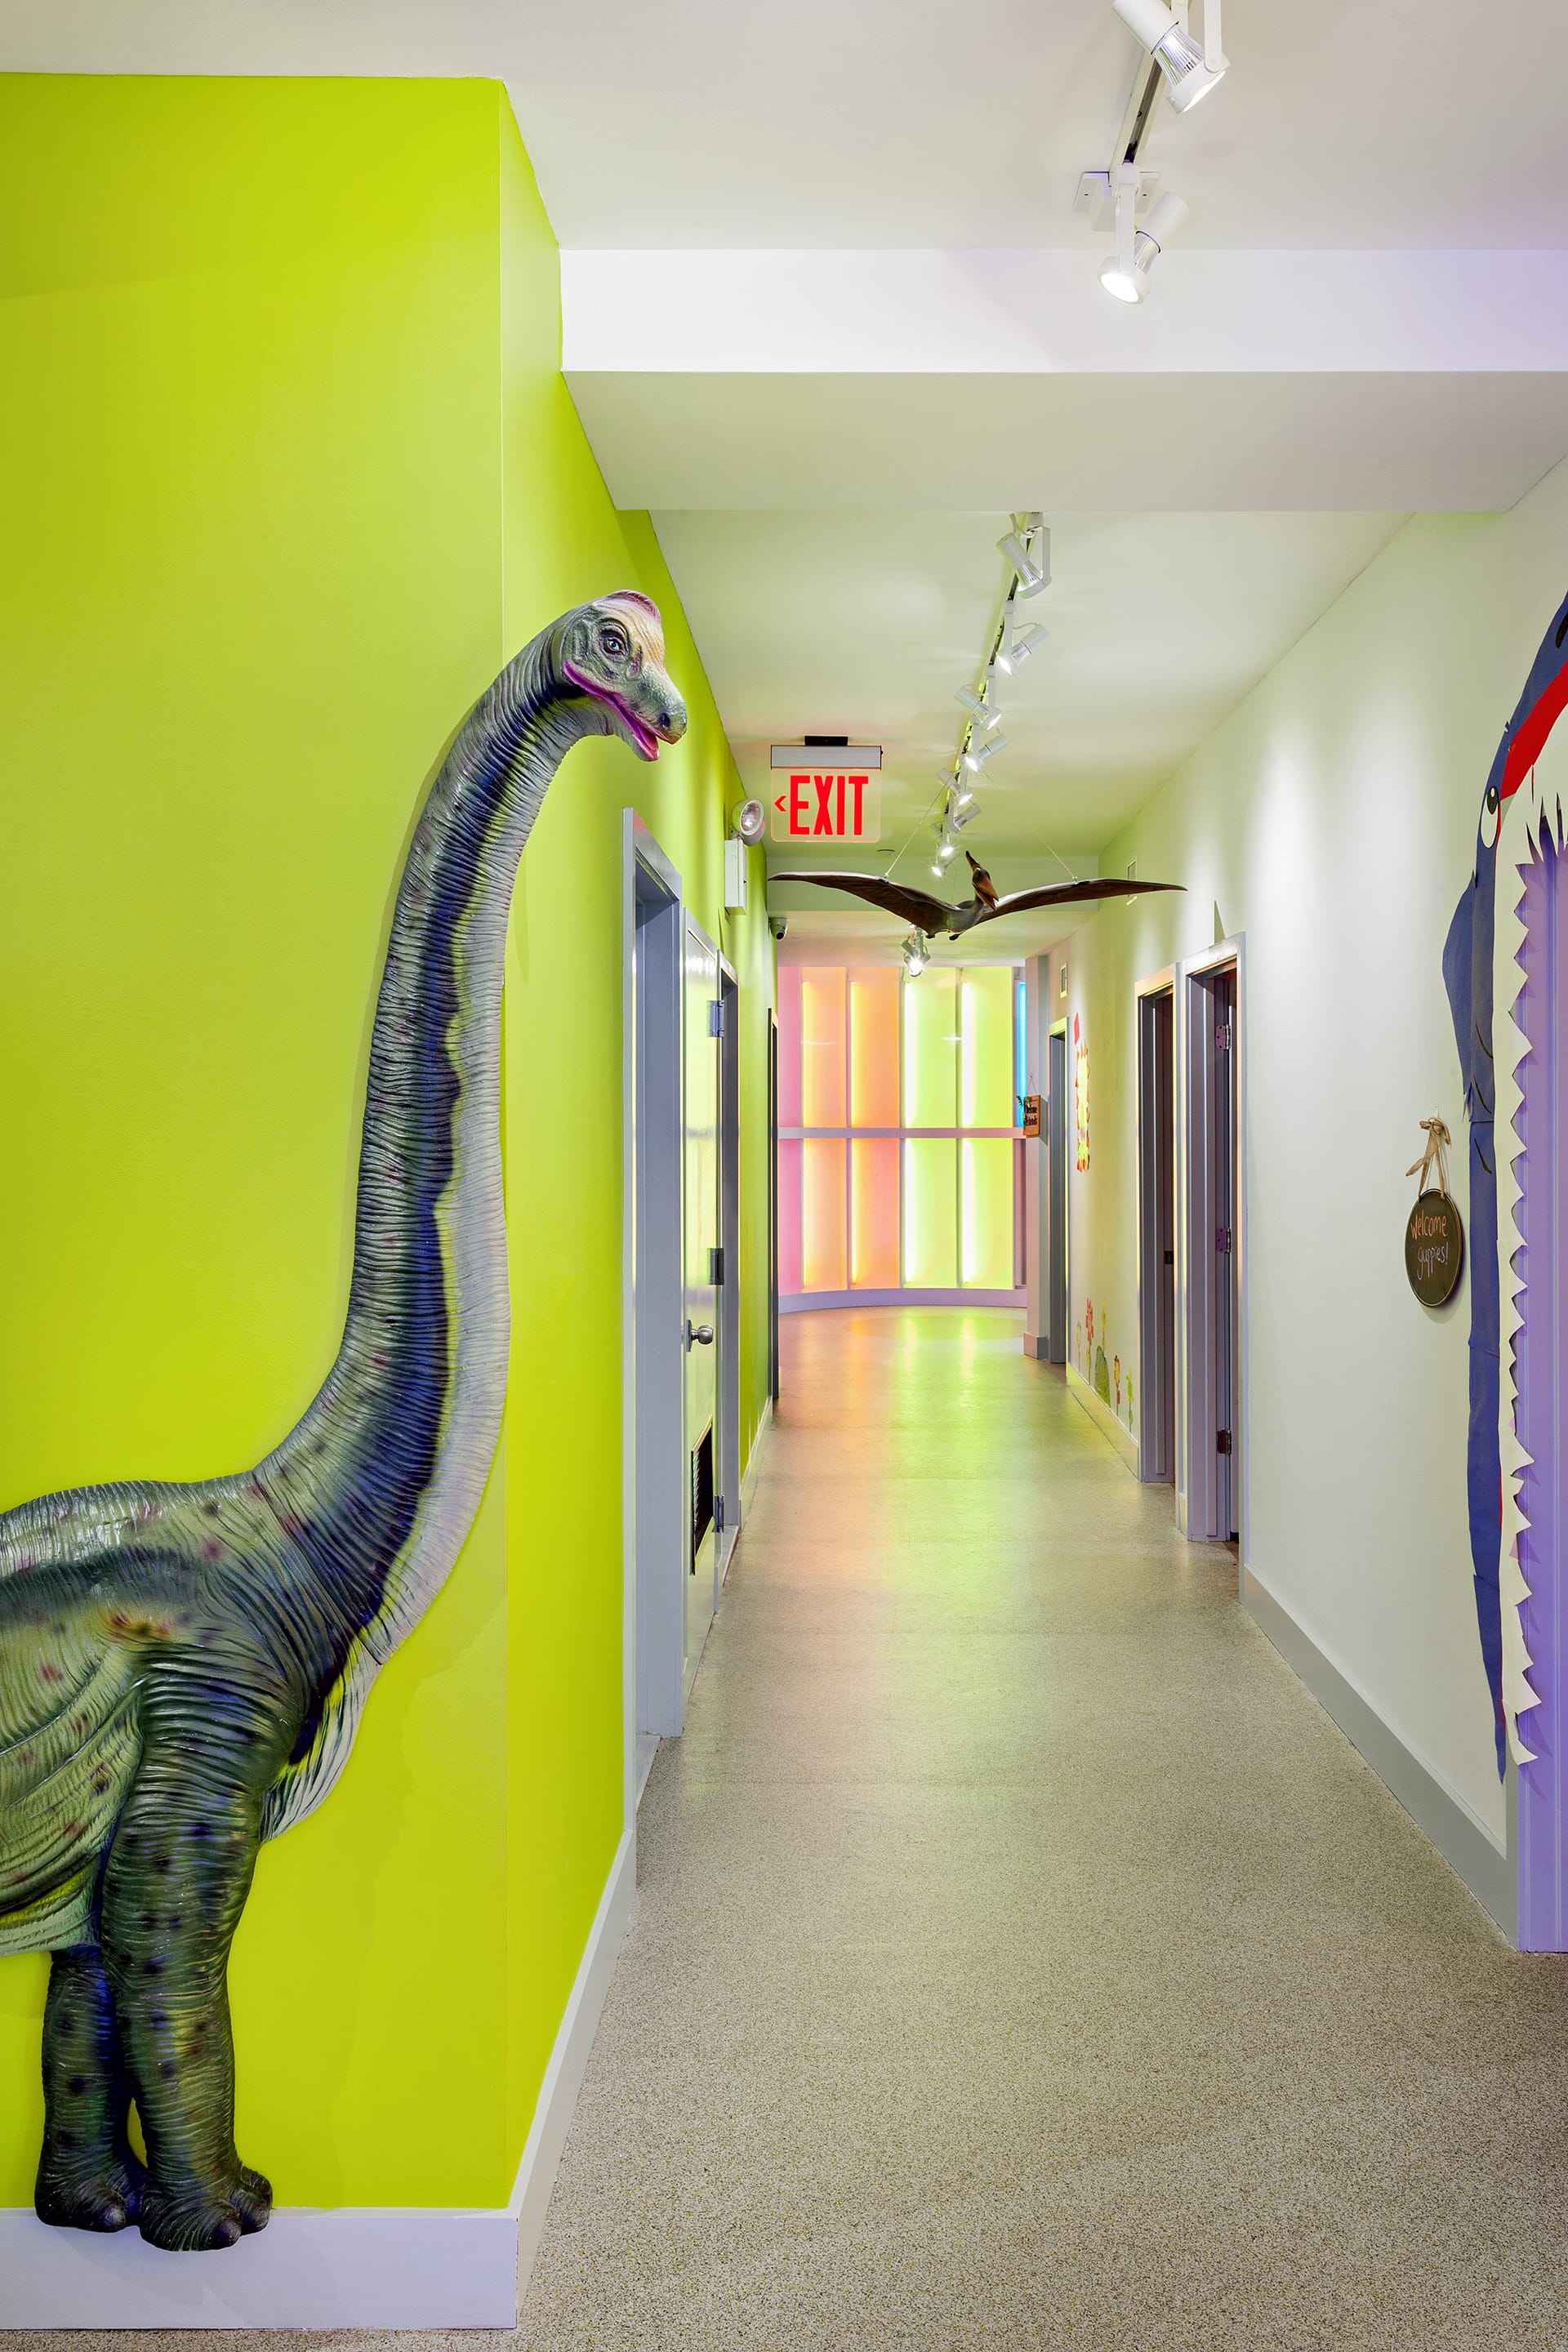 Hallway with bright green walls, a large dinosaur model, and a neon-lit rotunda at the end of the hall.